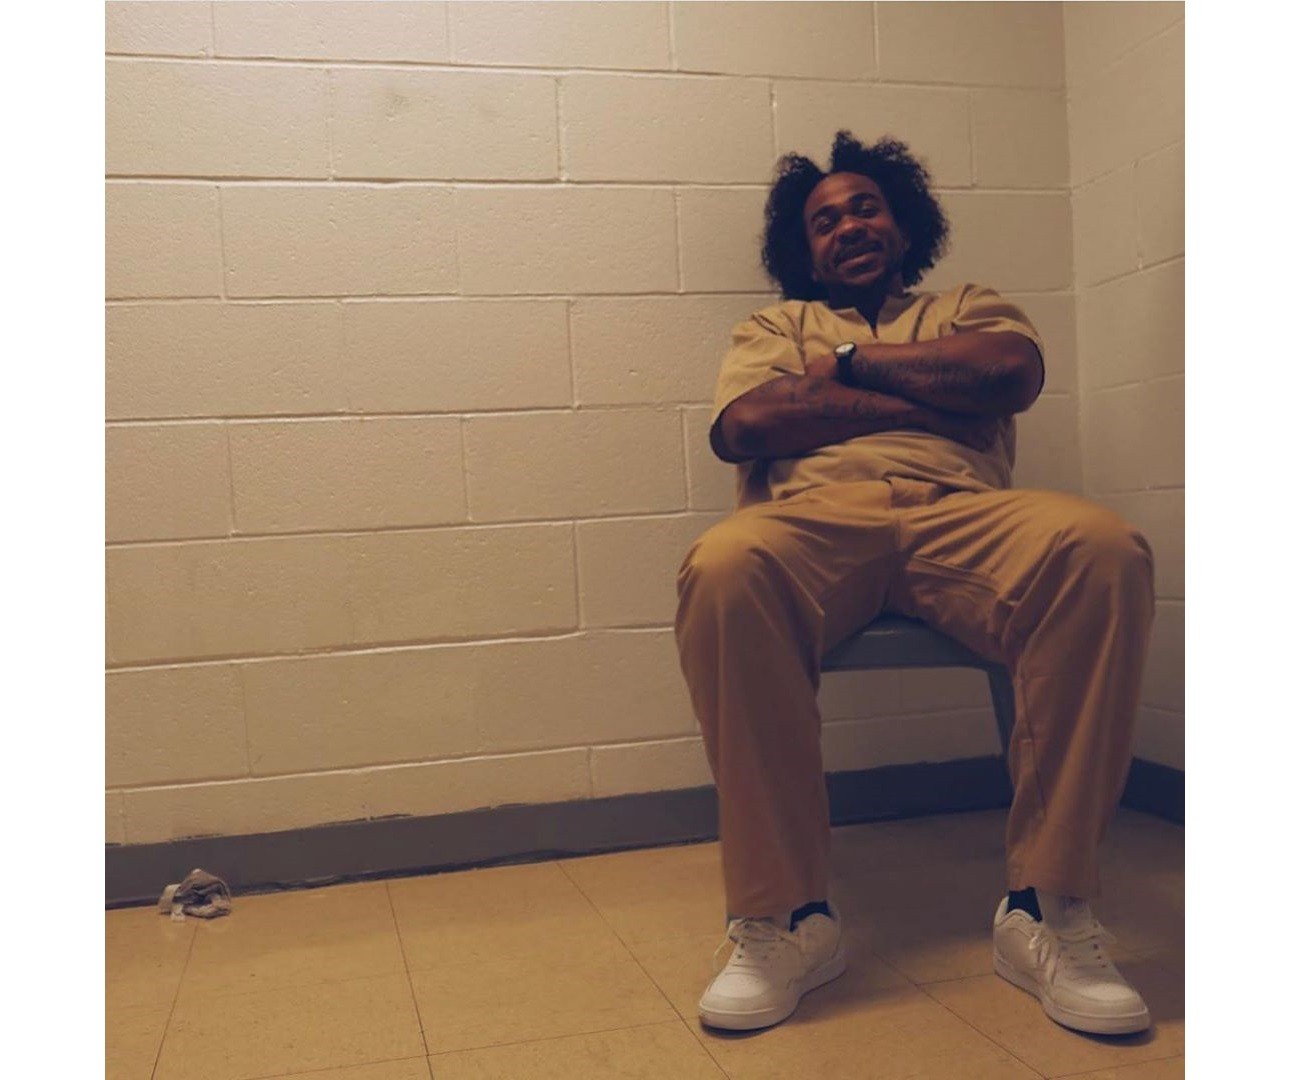 Max B Speaks on Getting 75 Year Sentence Cut Down to 12 Years